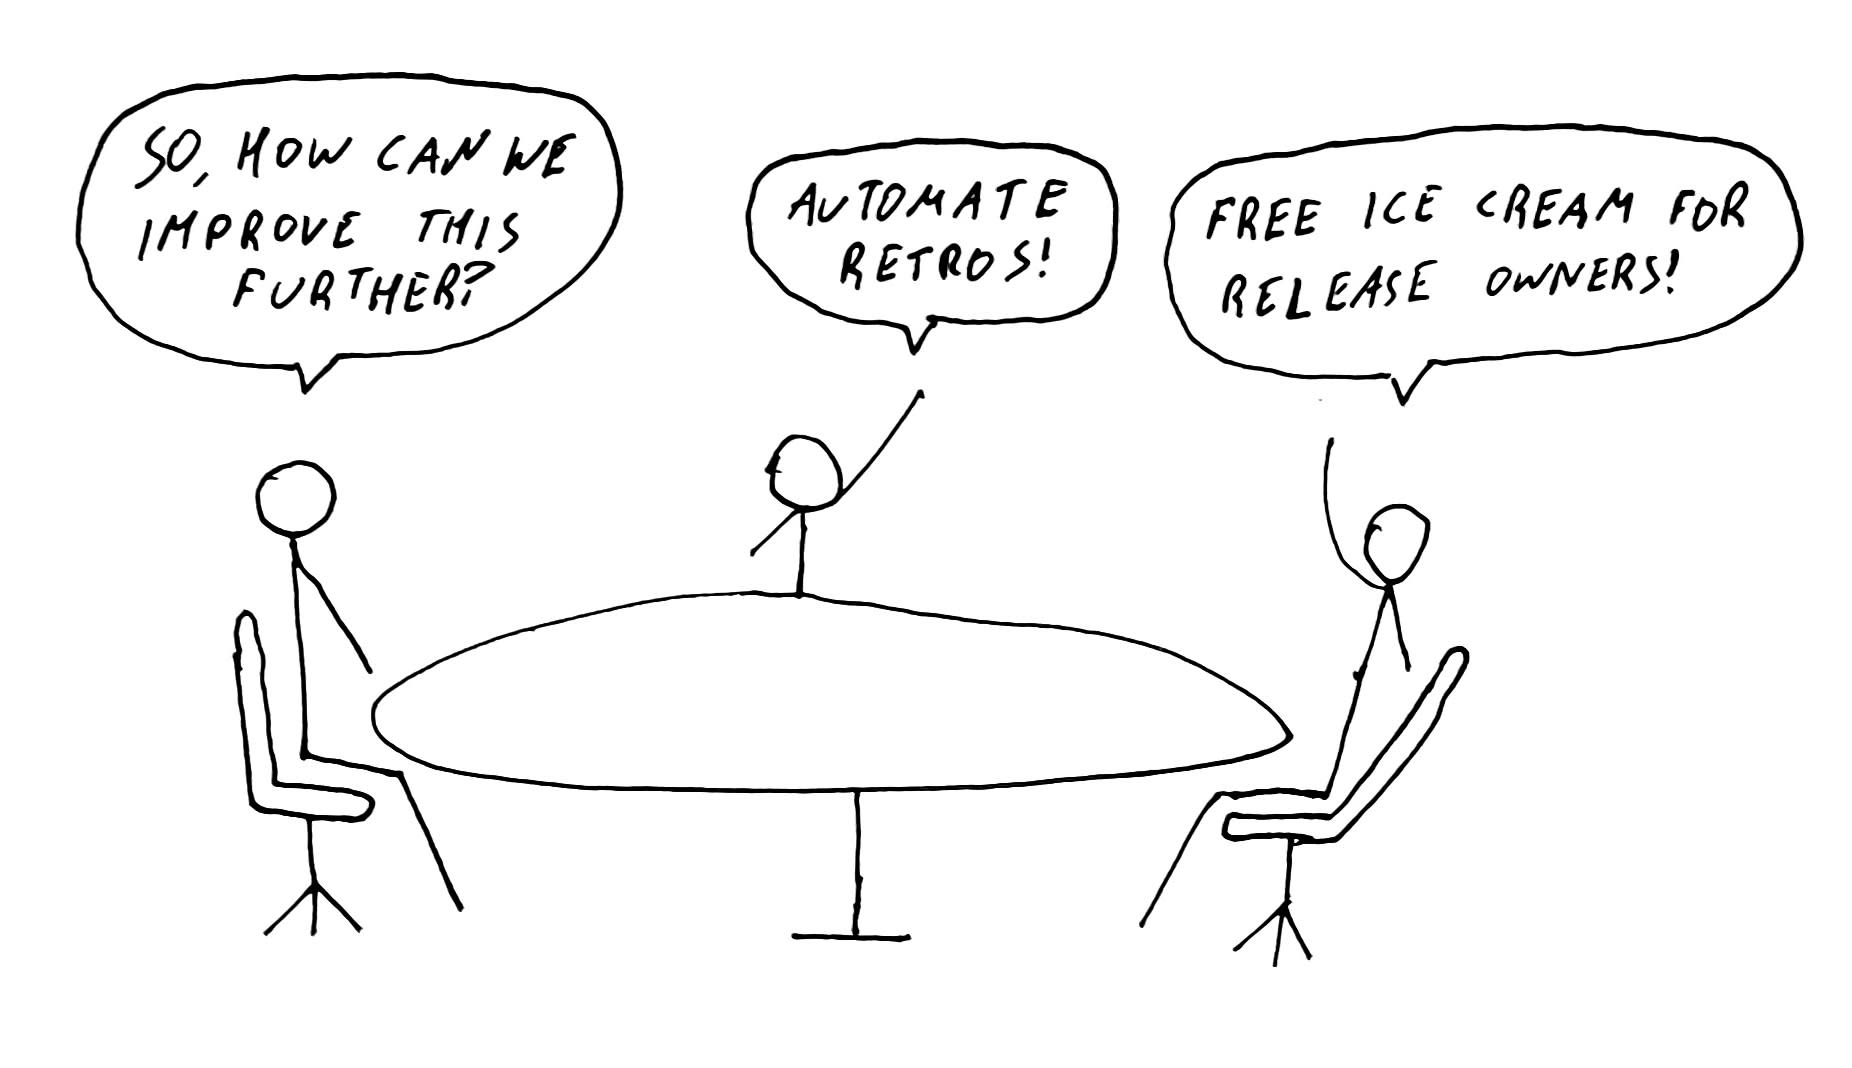 3 people talking around a table. "So, how can we improve this further?" Someone with a raised hand: "Automate retros!" Someone else: "Free ice cream for release owners.